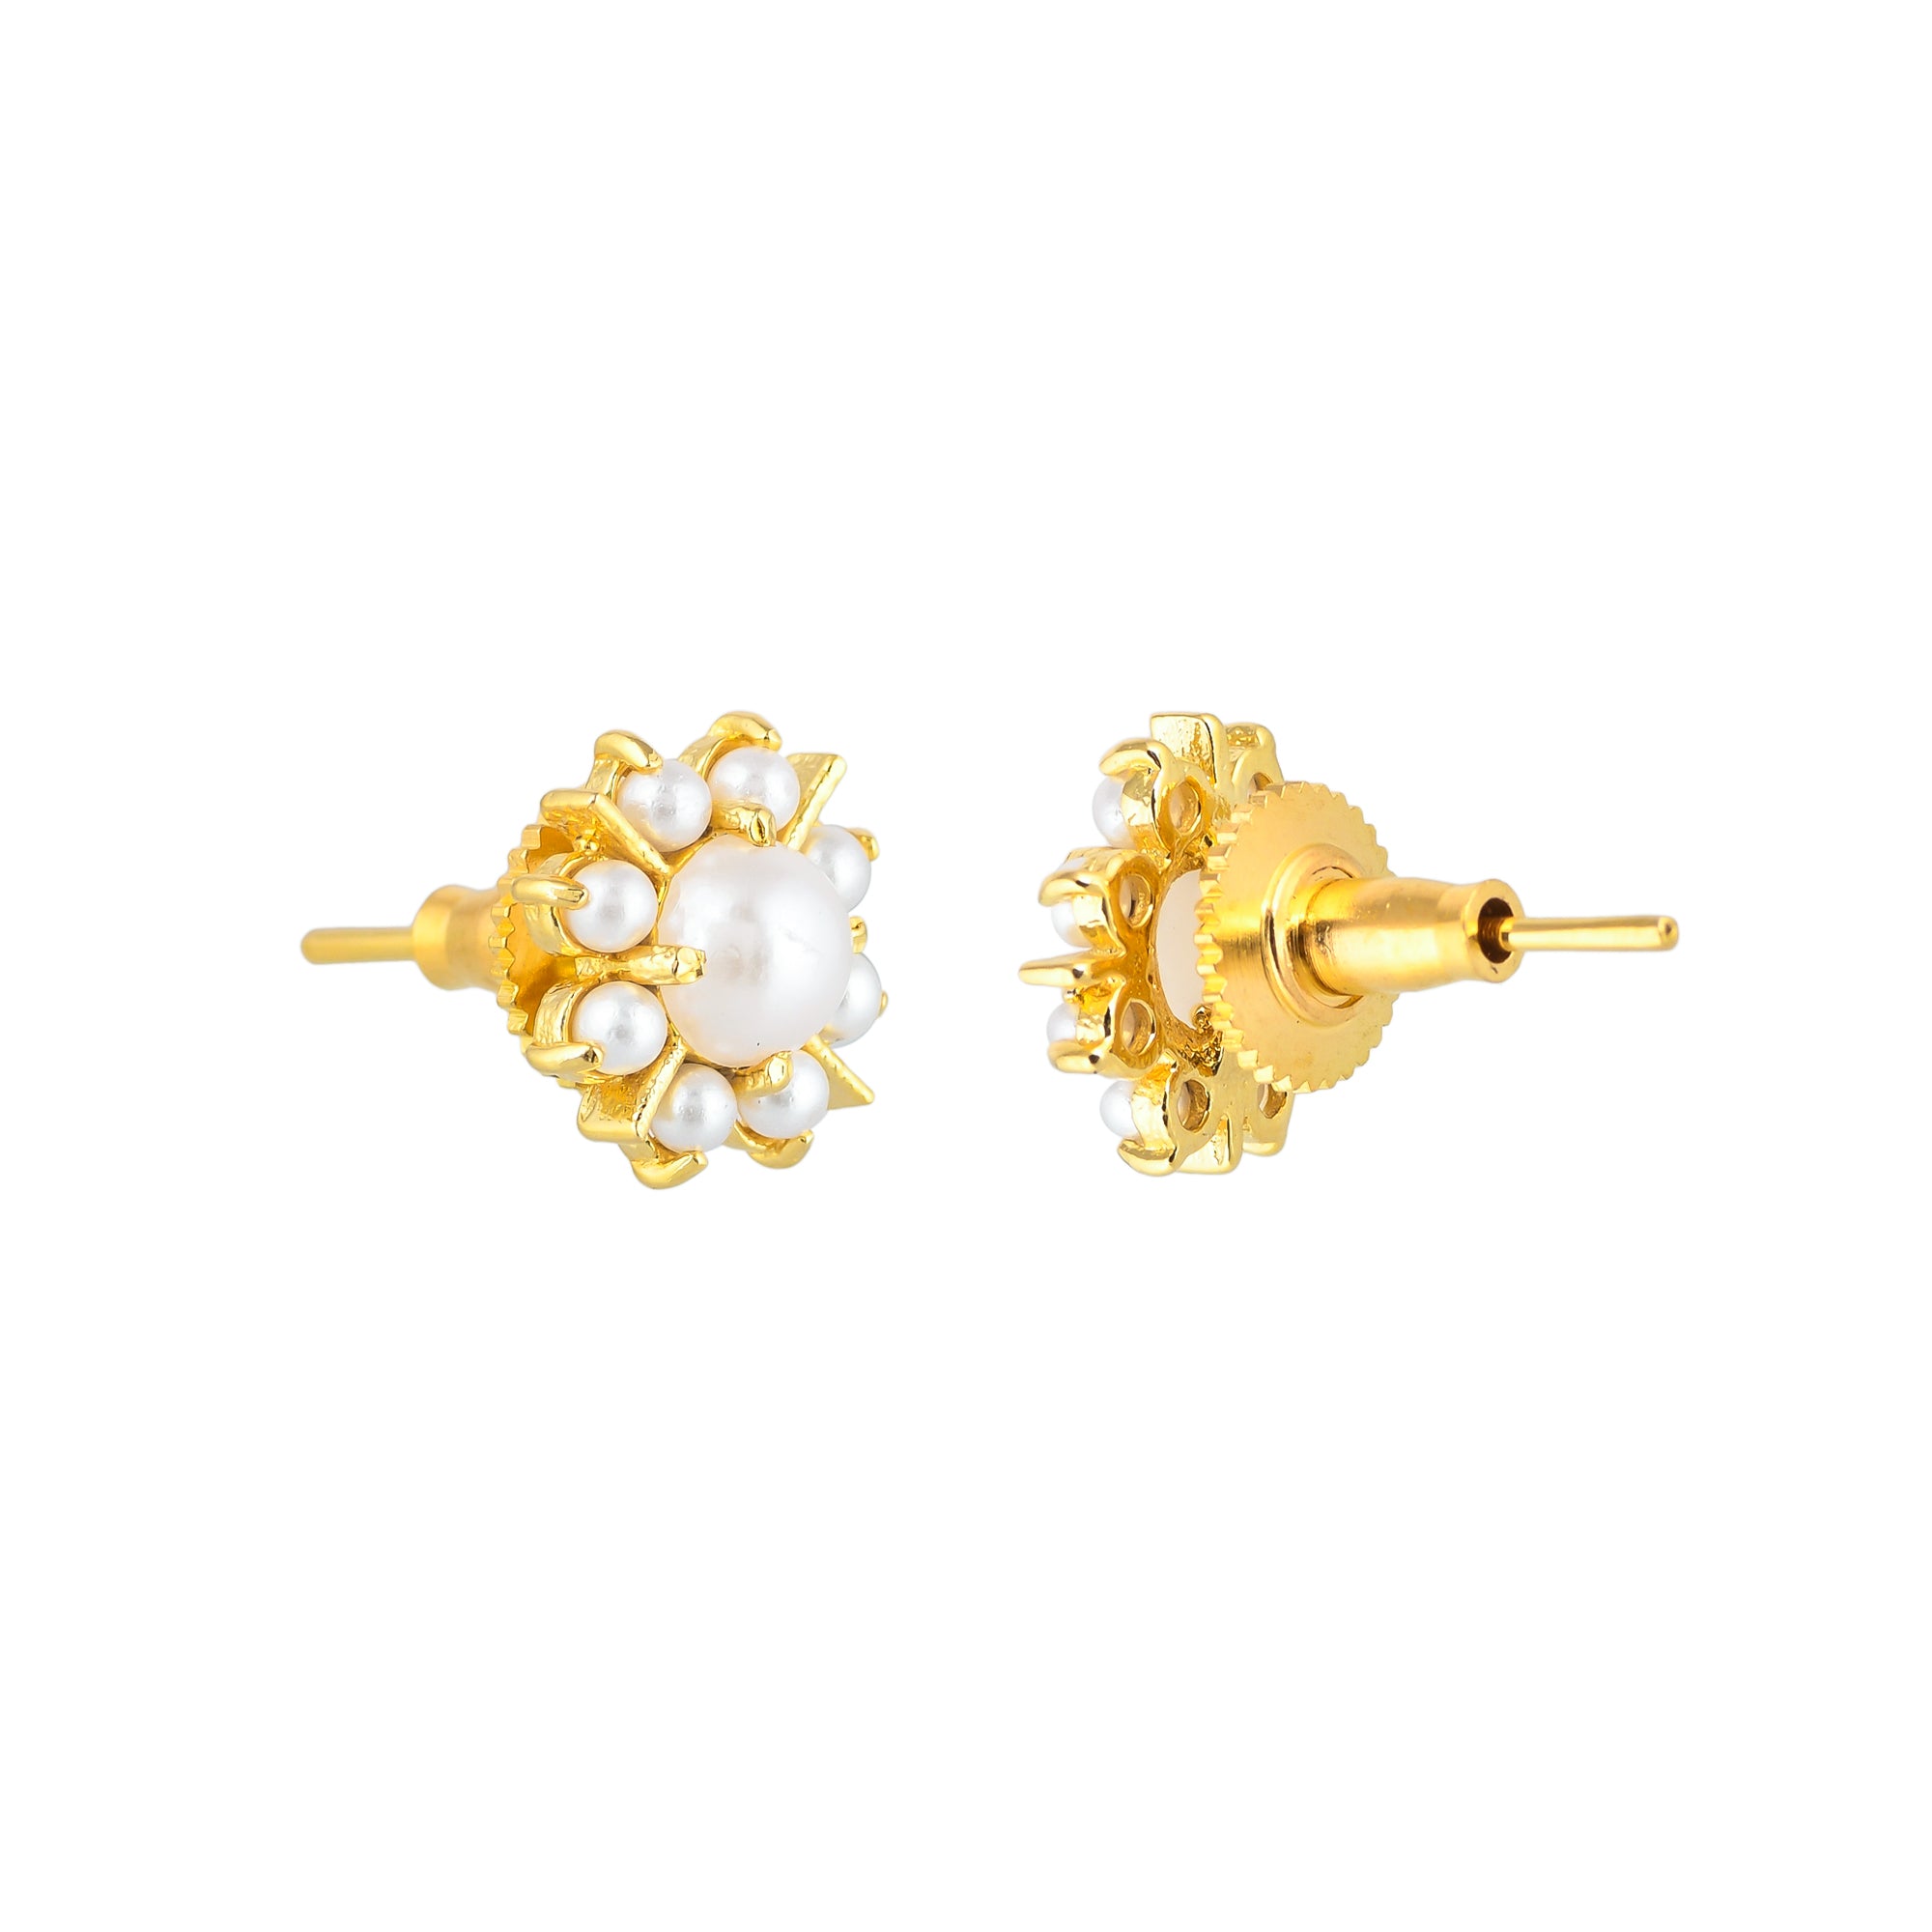 White Pearl Beads Gold Plated Stud Earrings